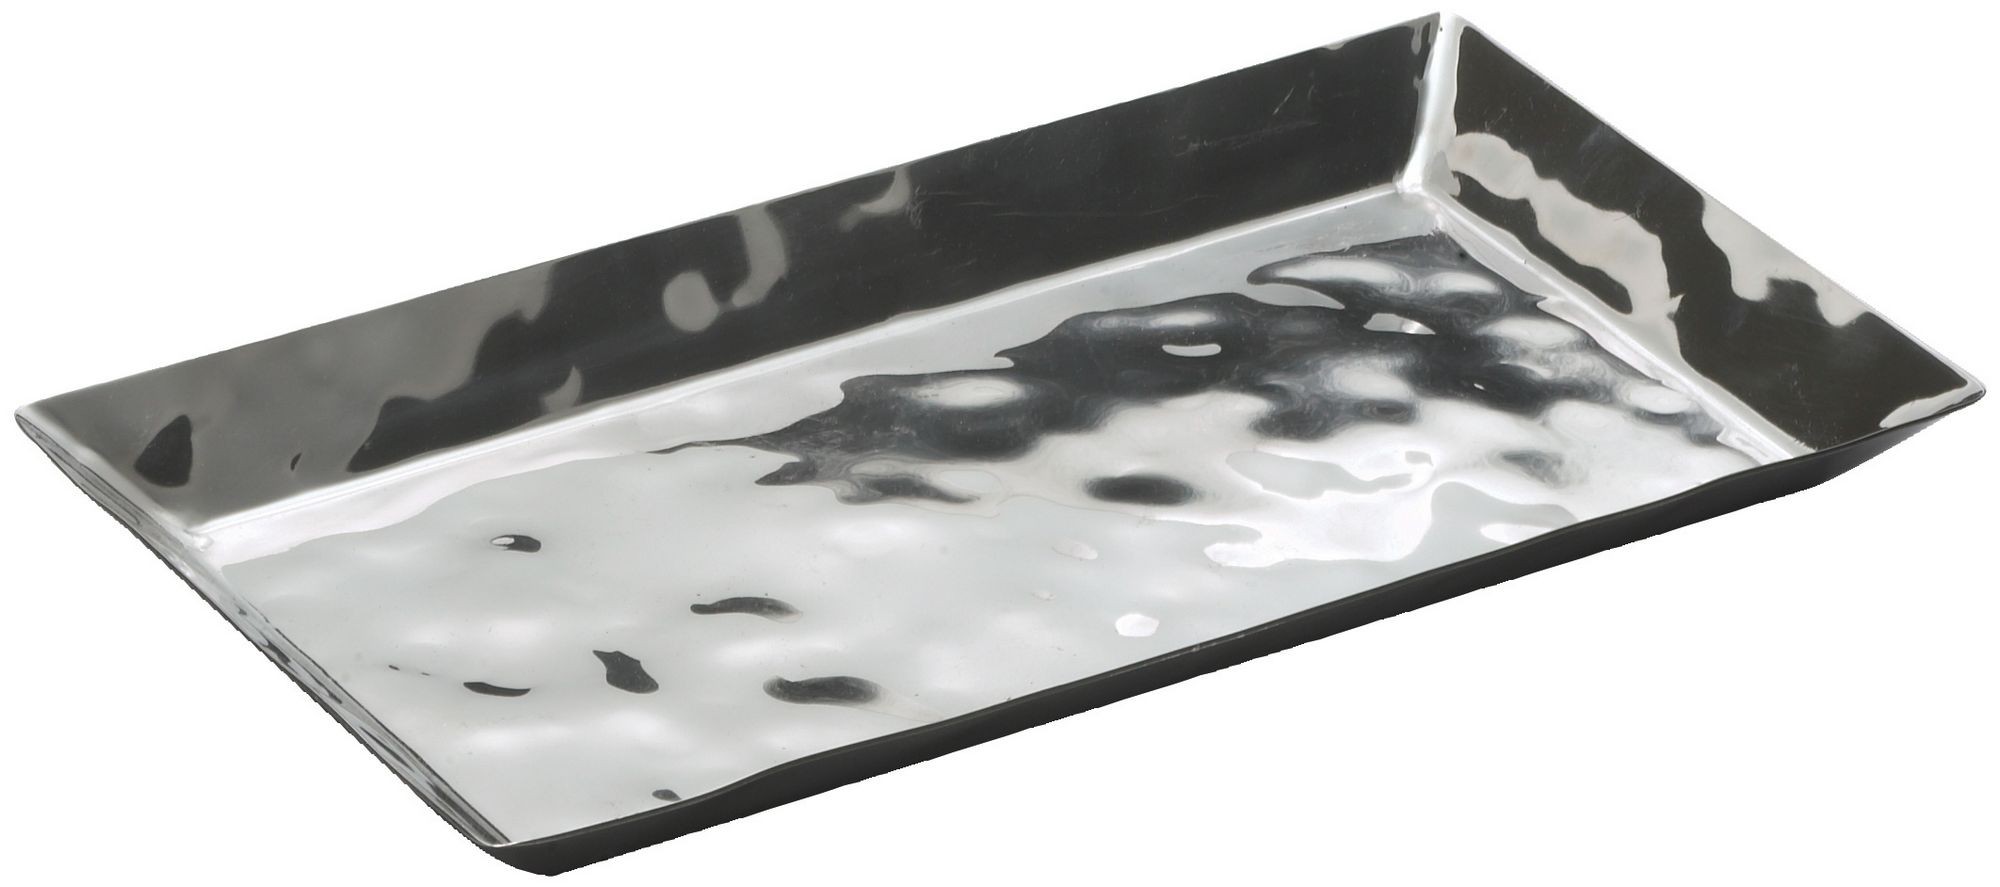 Winco HPO-15 Hammered Steel Oblong Serving / Display Tray, 15" x 8-1/2" x 1"